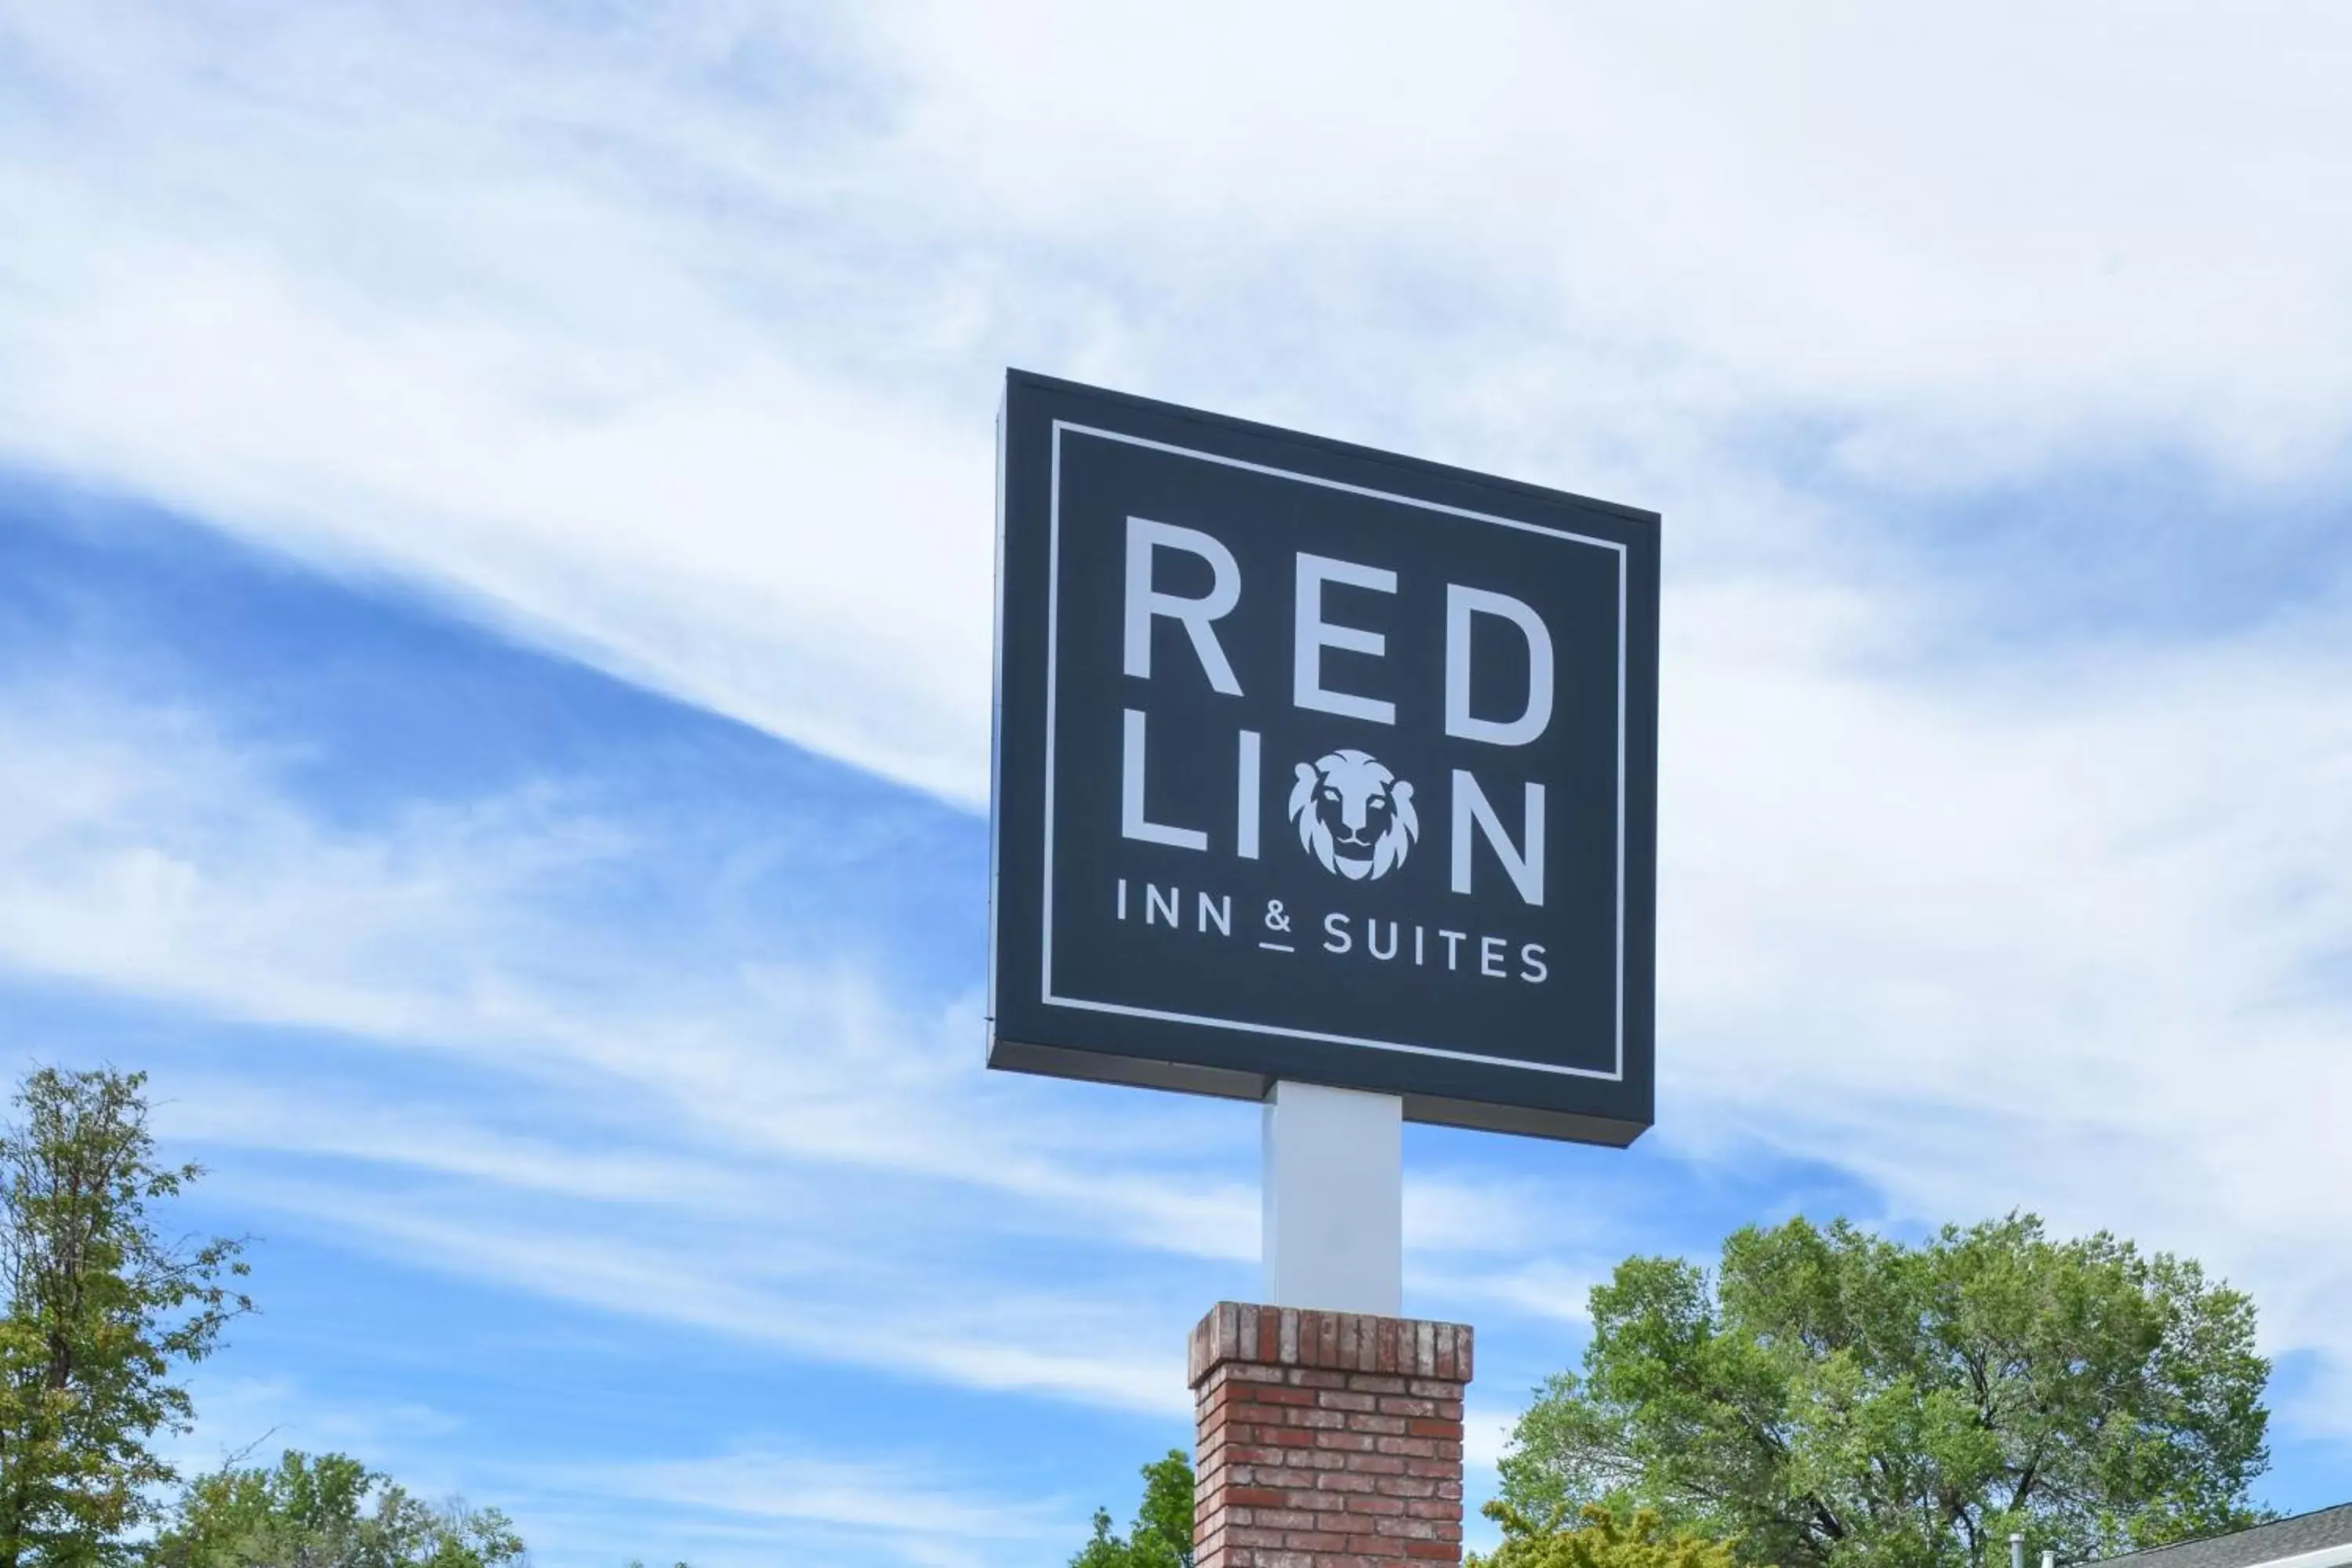 Property building in Red Lion Inn & Suites Port Orchard